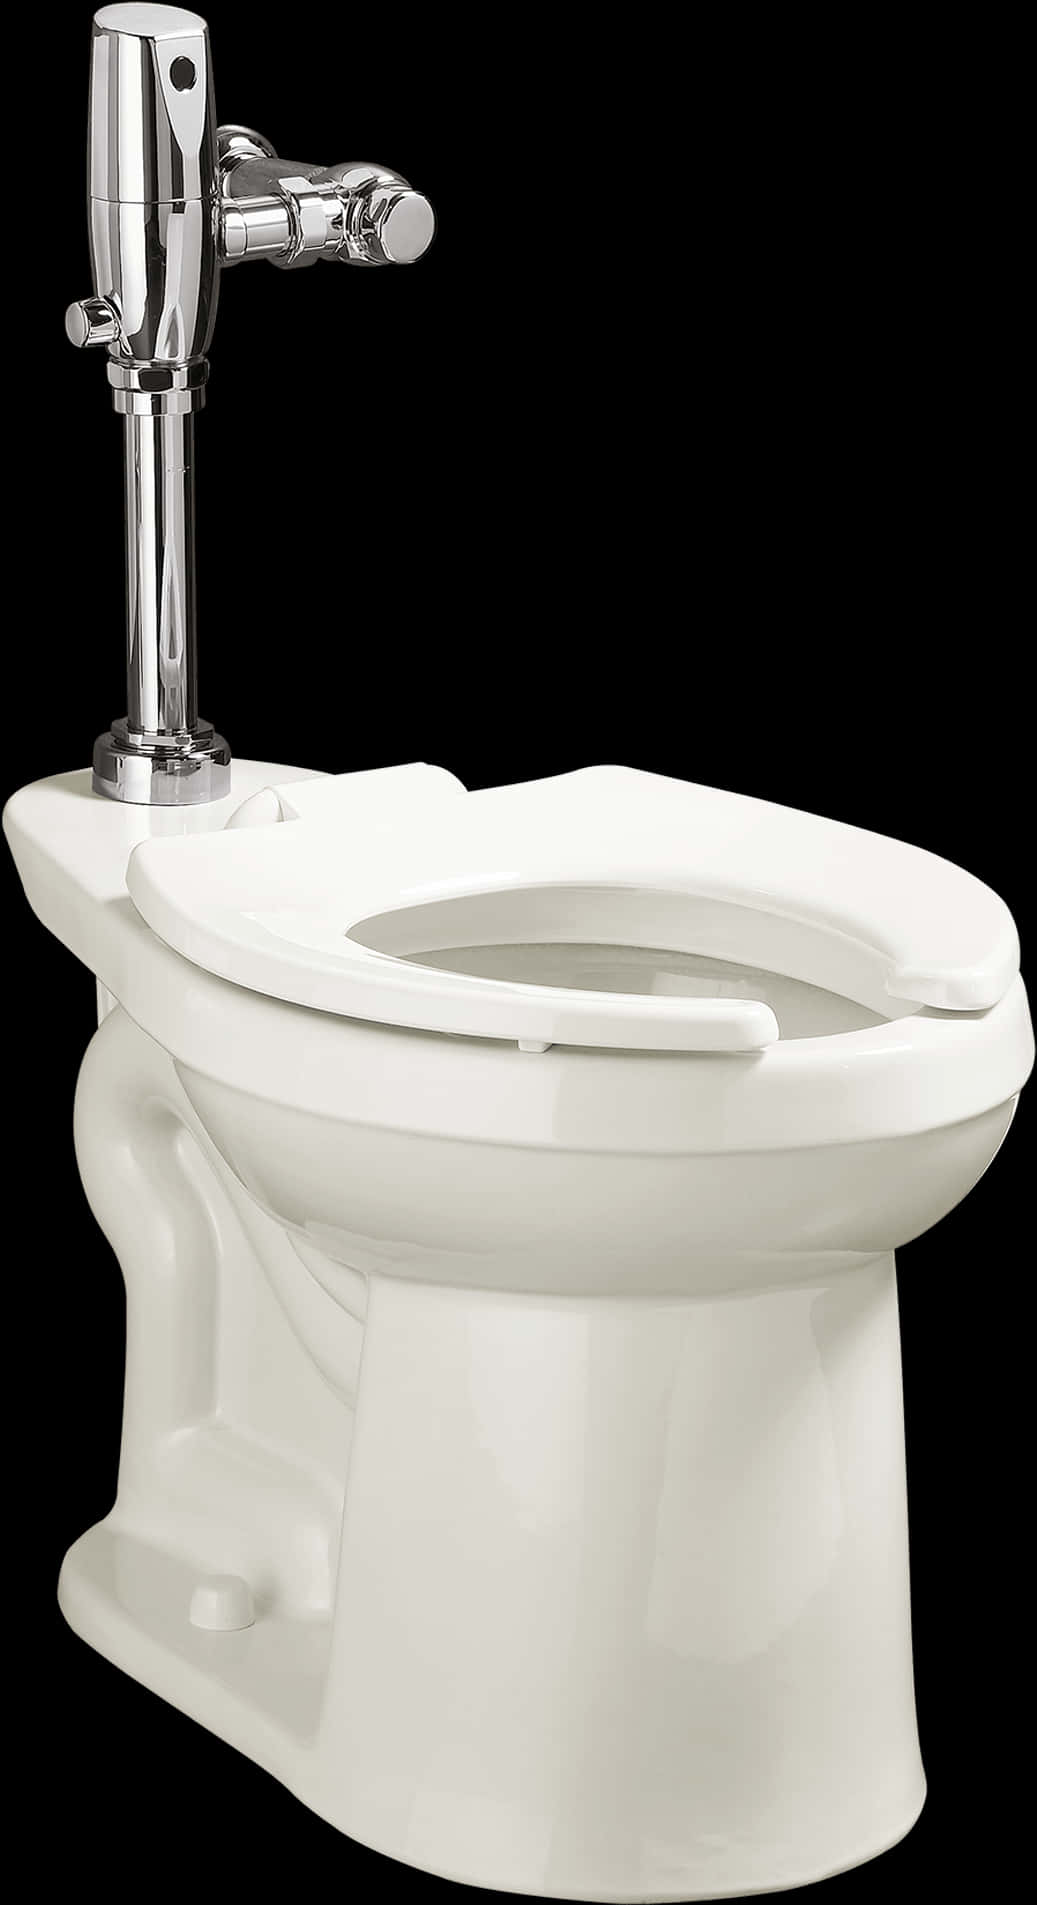 Modern White Toiletwith Flush Handle PNG